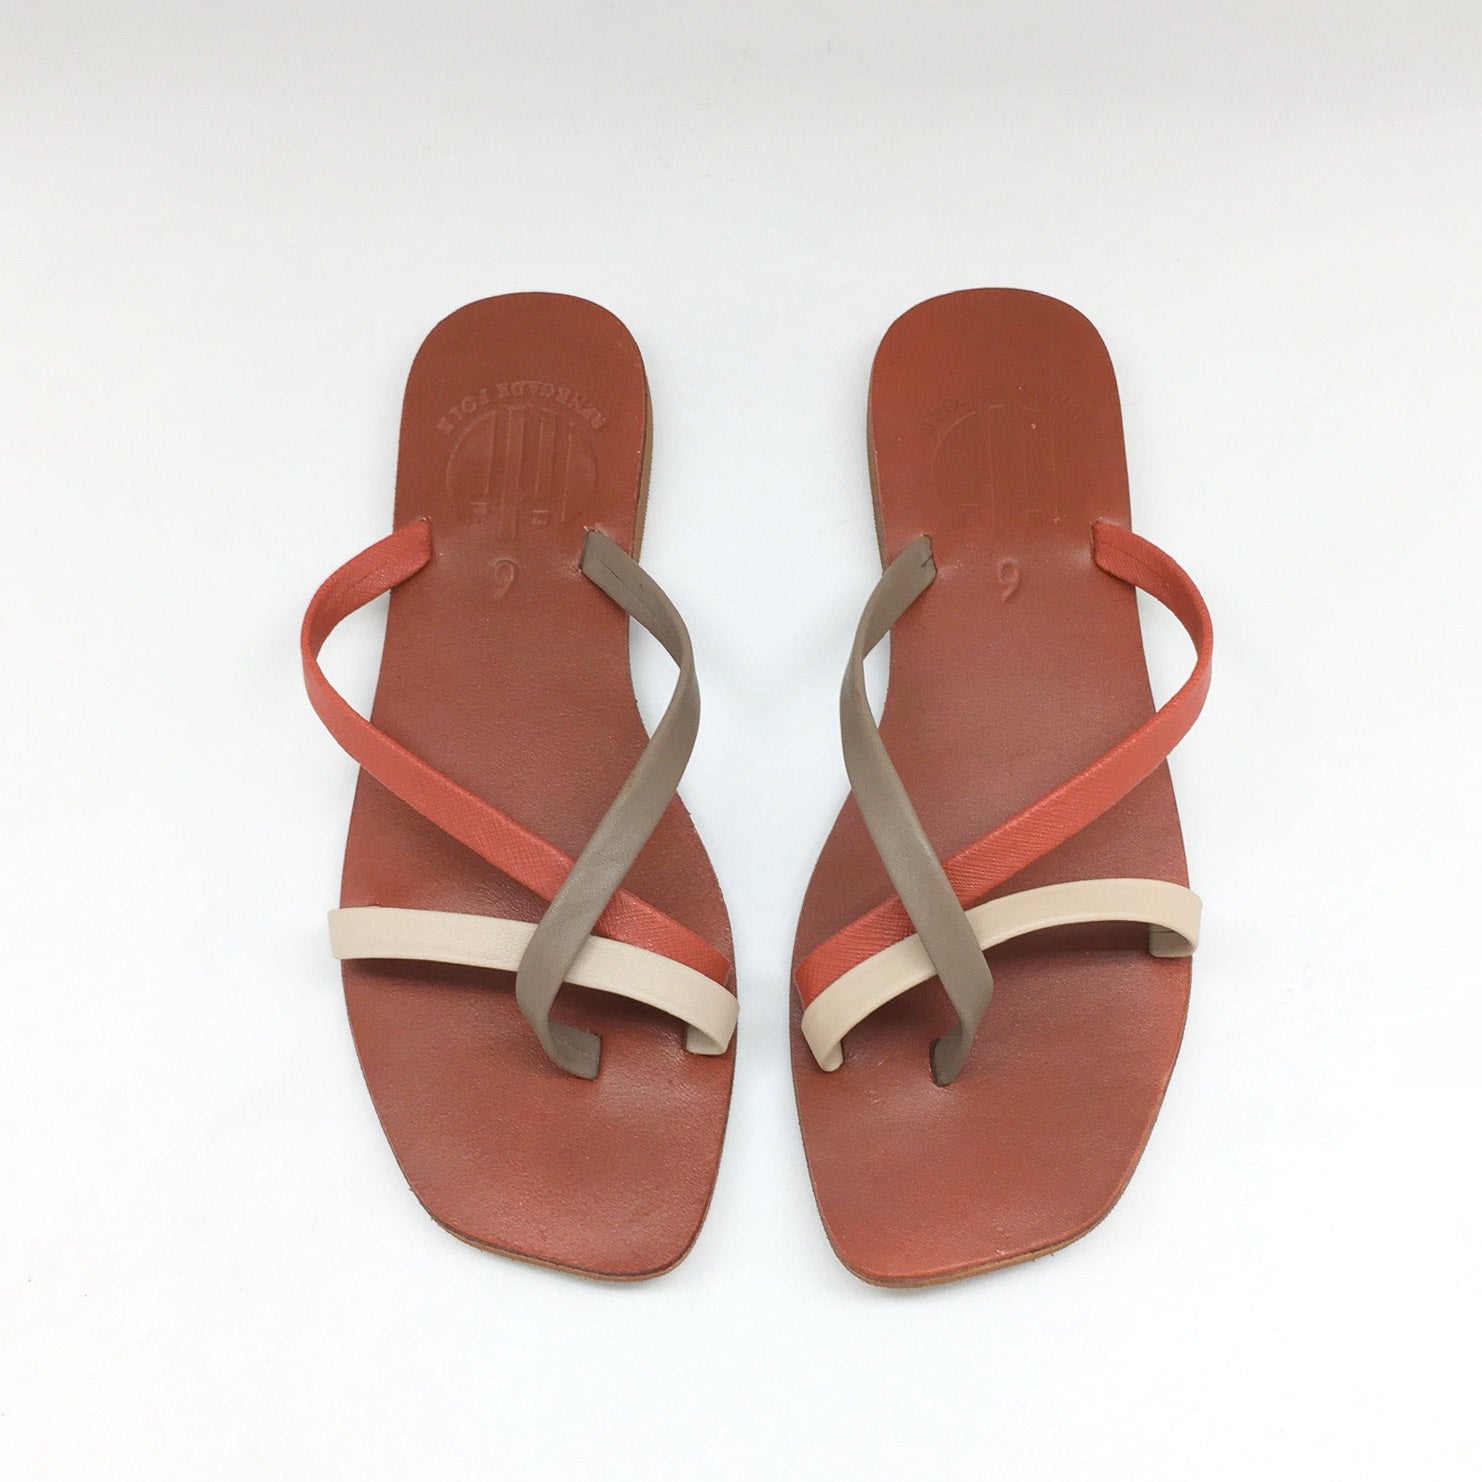 All Day Sandals